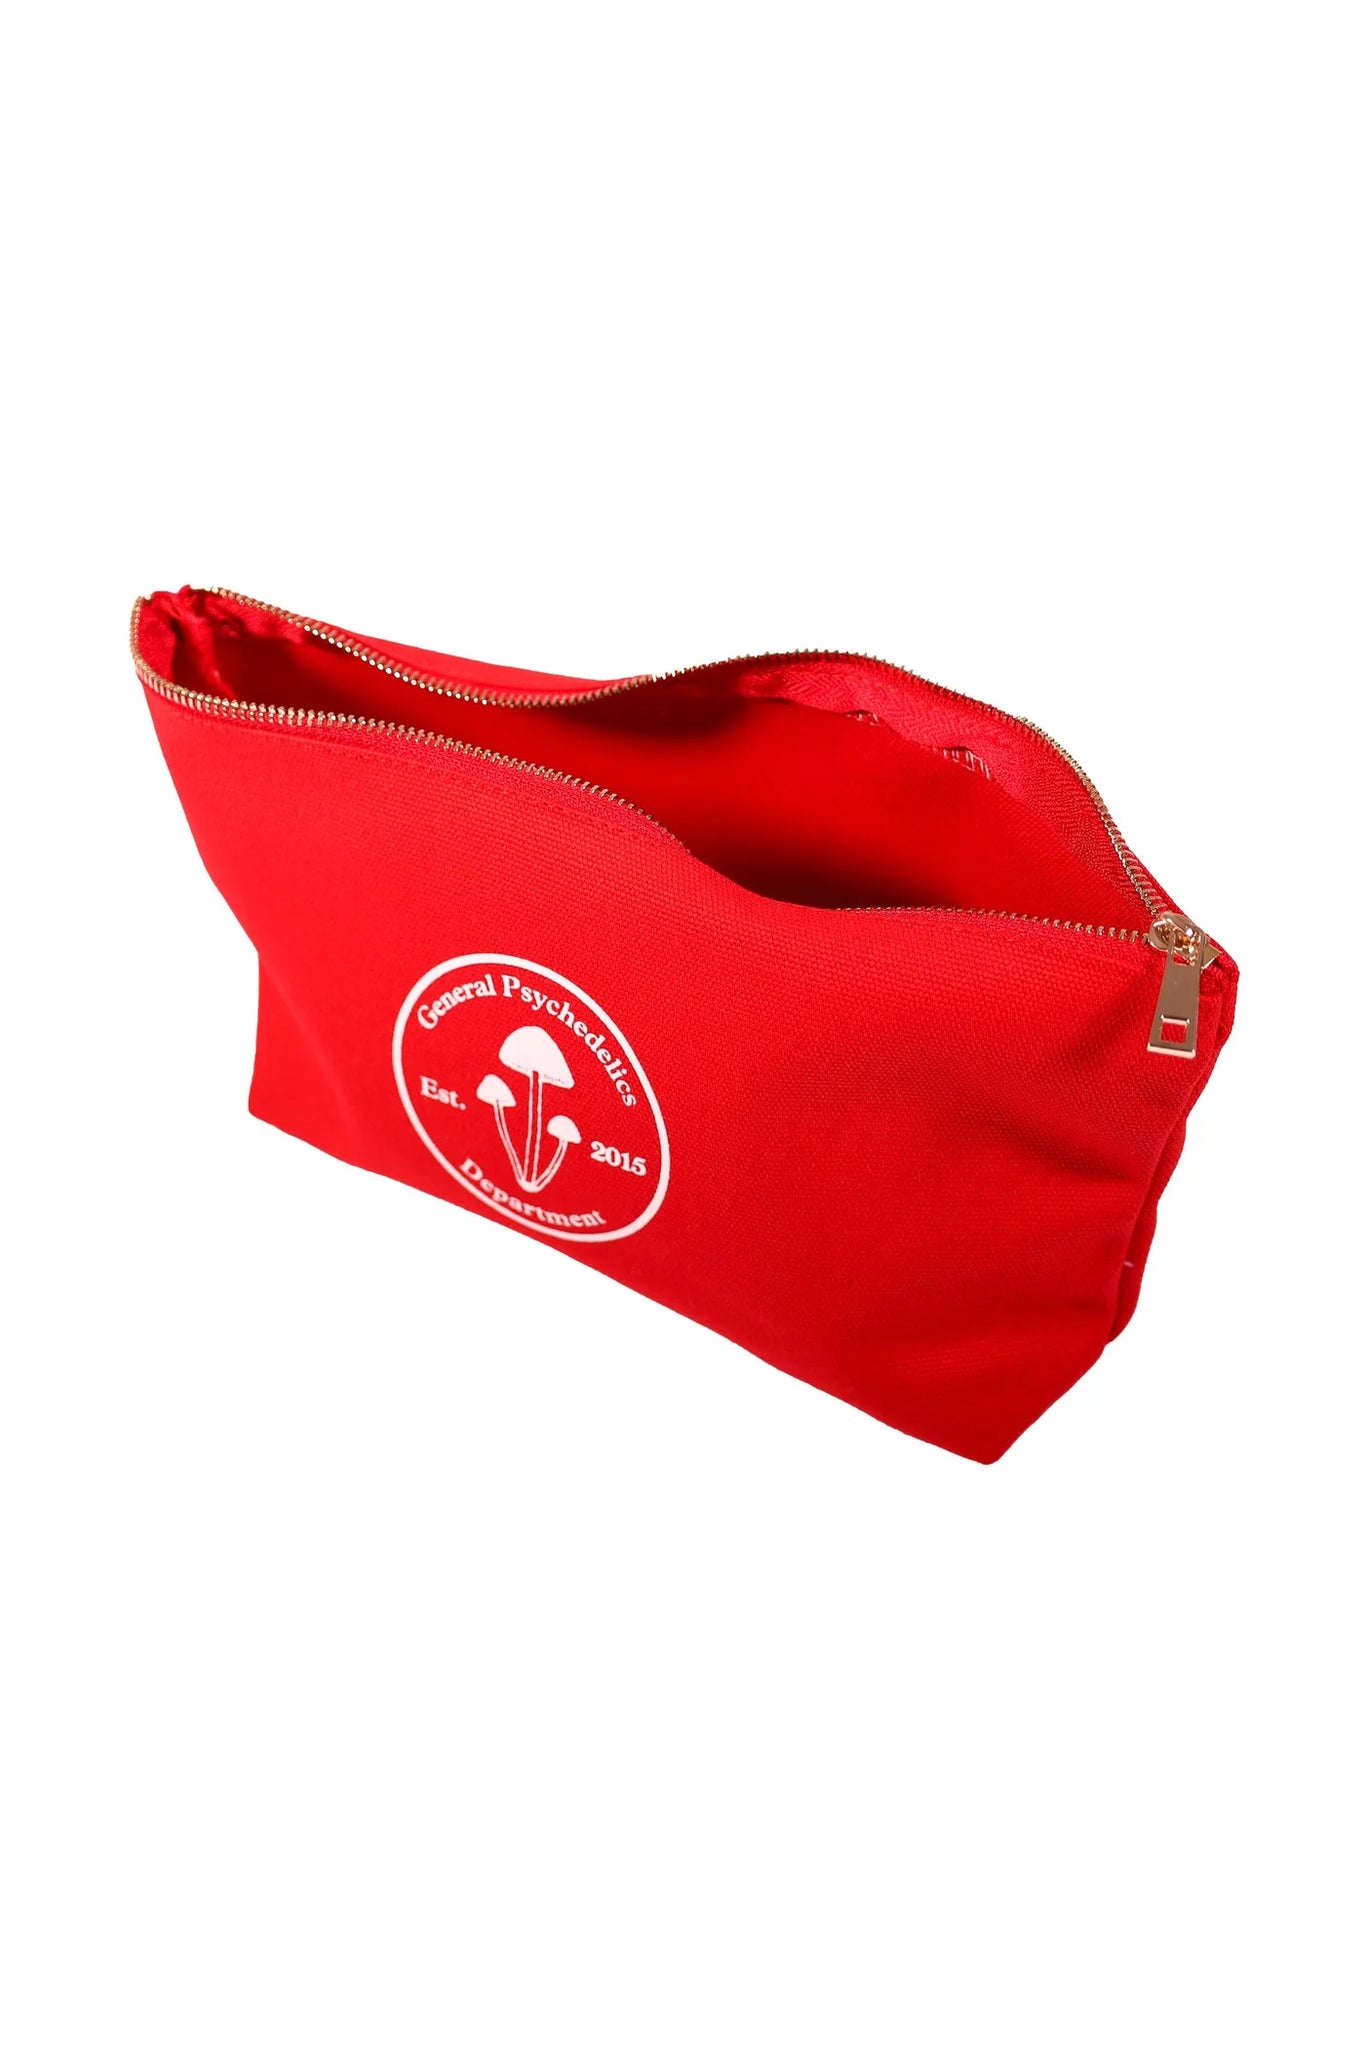 General Psychedelic Department Tool  Bag - Red